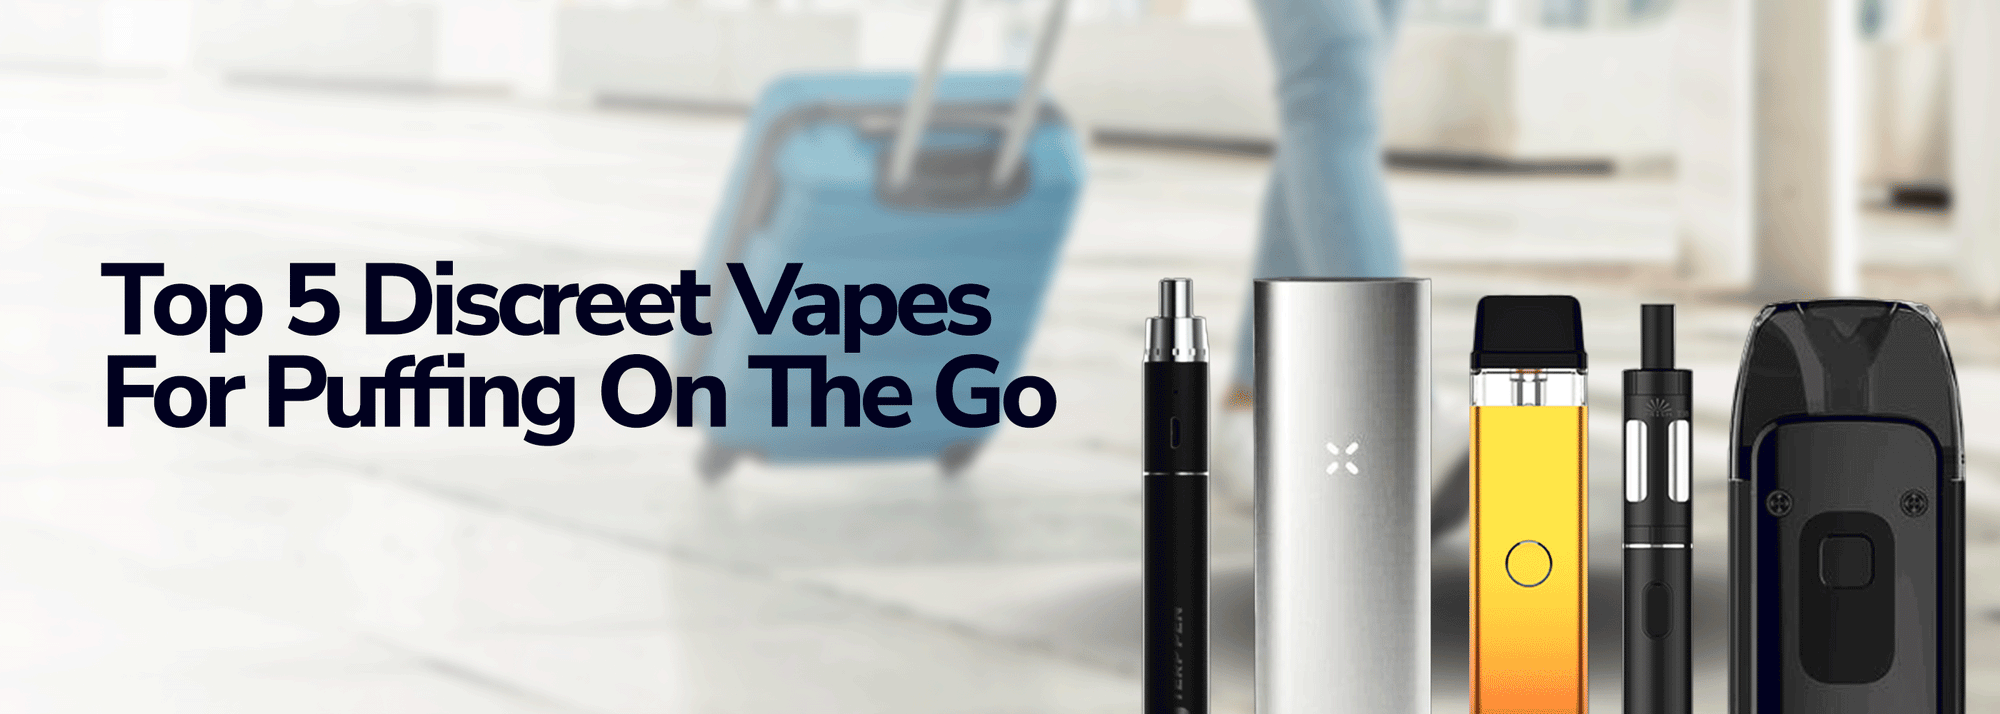 Top 5 Discreet Vapes For Puffing On The Go - Wick and Wire Co Melbourne Vape Shop, Victoria Australia